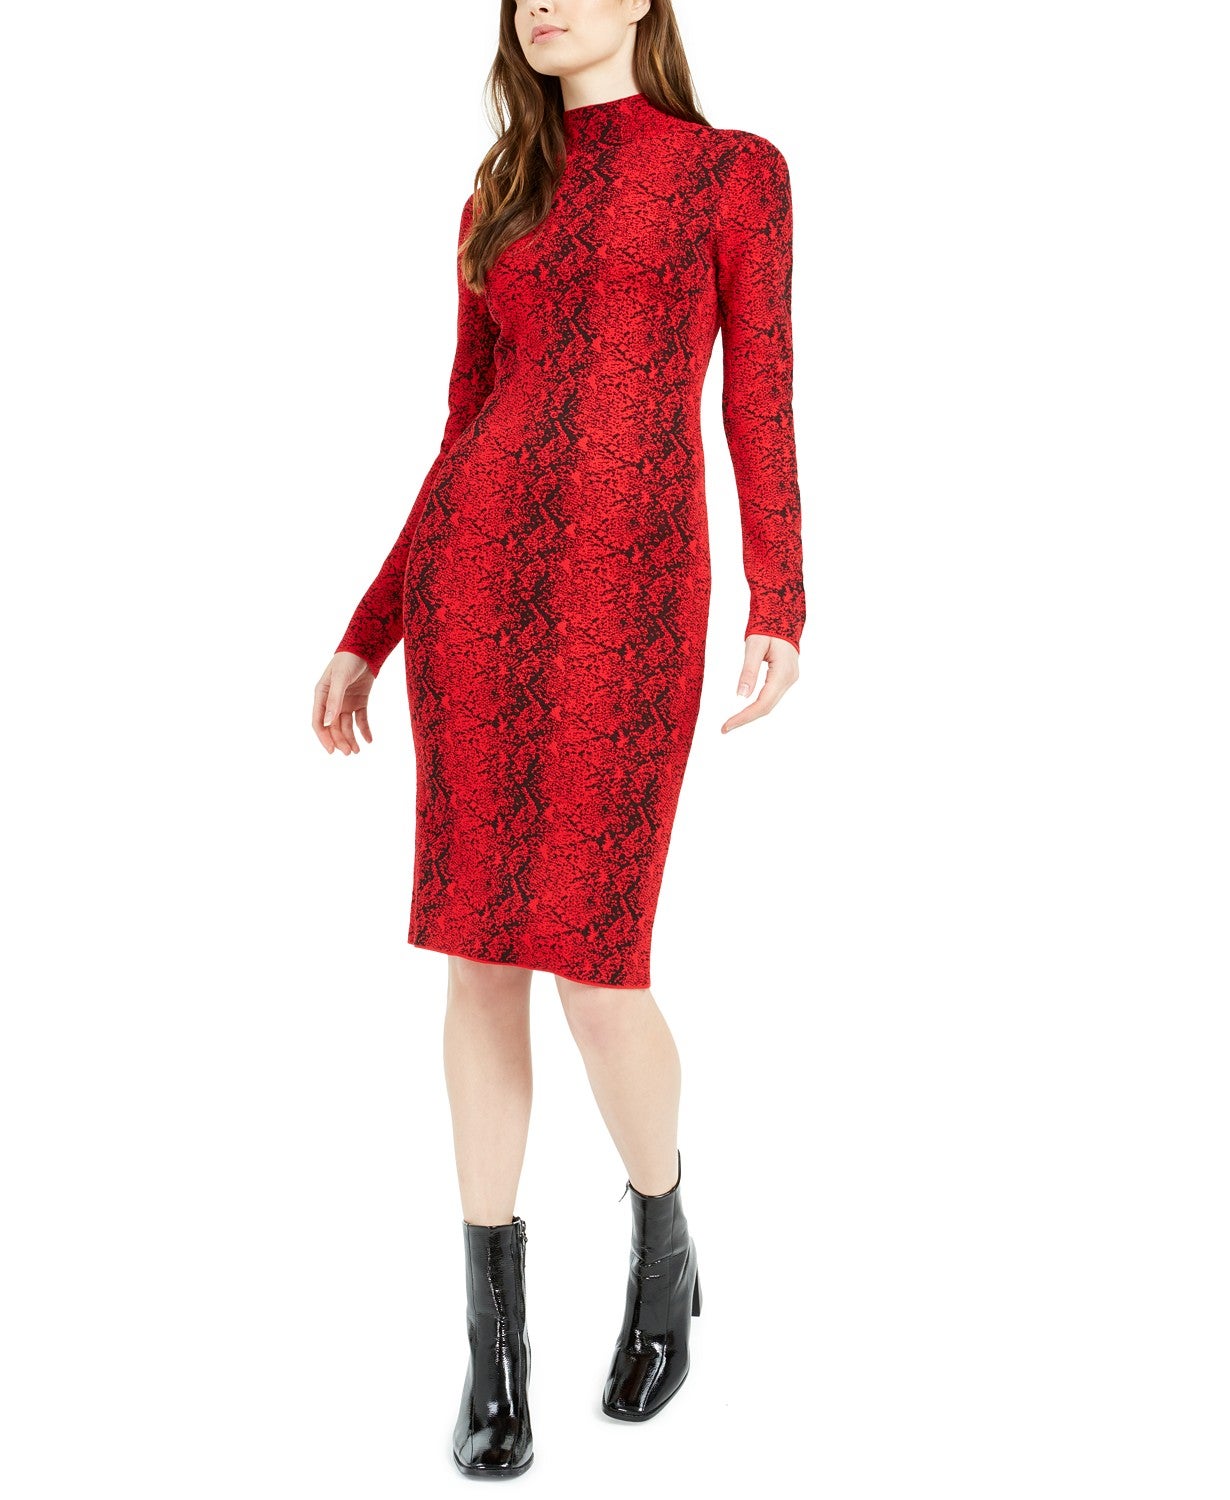 Keep It Cute & Warm With These Chic Sweater Dresses